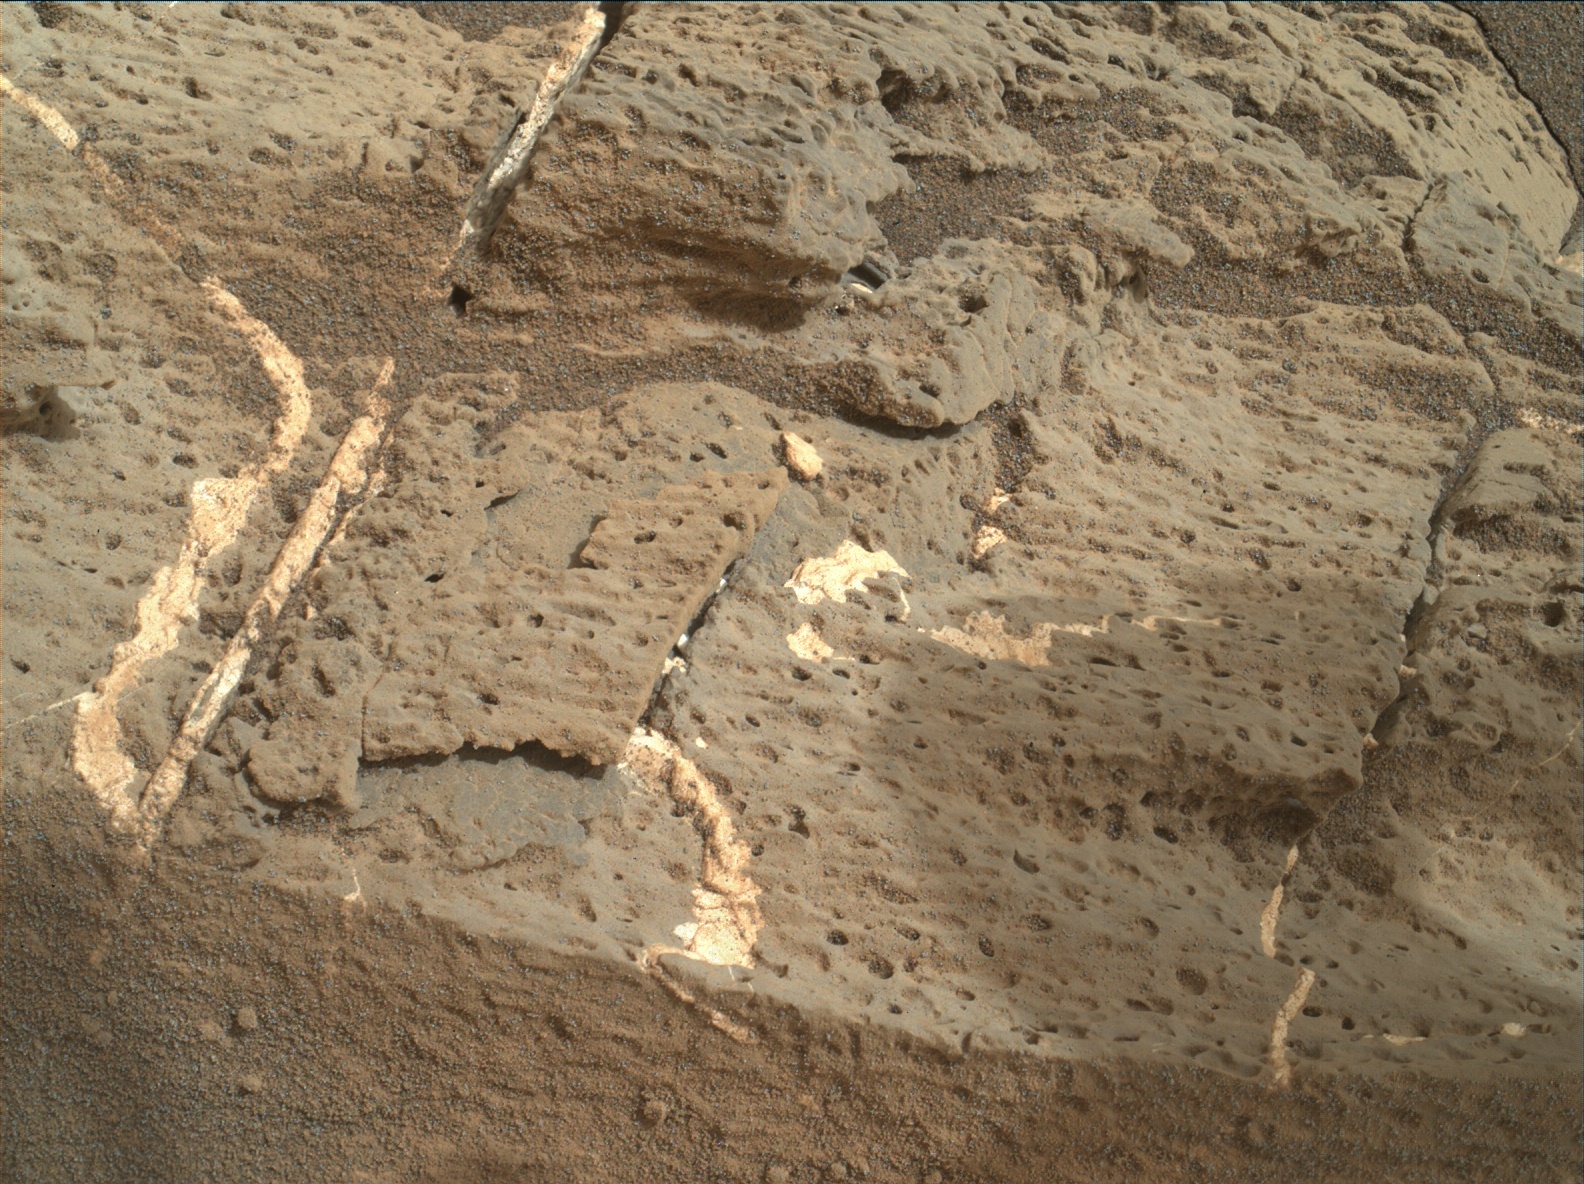 Nasa's Mars rover Curiosity acquired this image using its Mars Hand Lens Imager (MAHLI) on Sol 1359